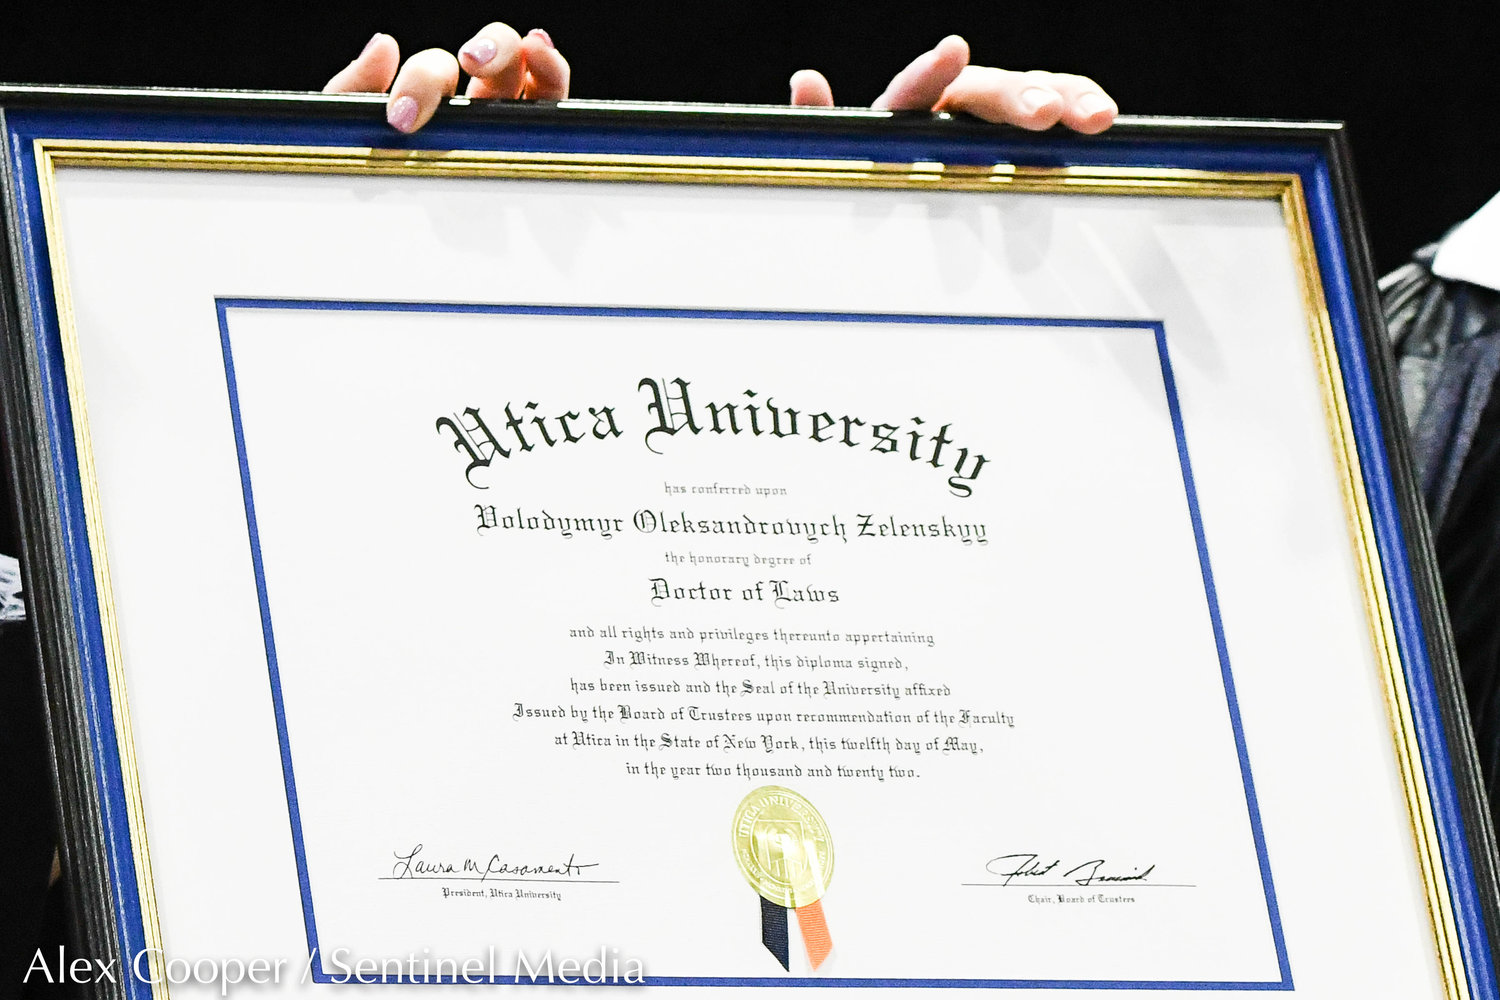 Utica University conferred an honorary degree upon Volodymyr Zelenskyy, the president of Ukraine, during the ceremony on Thursday at the Adirondack Bank Center at the Utica Memorial Auditorium.